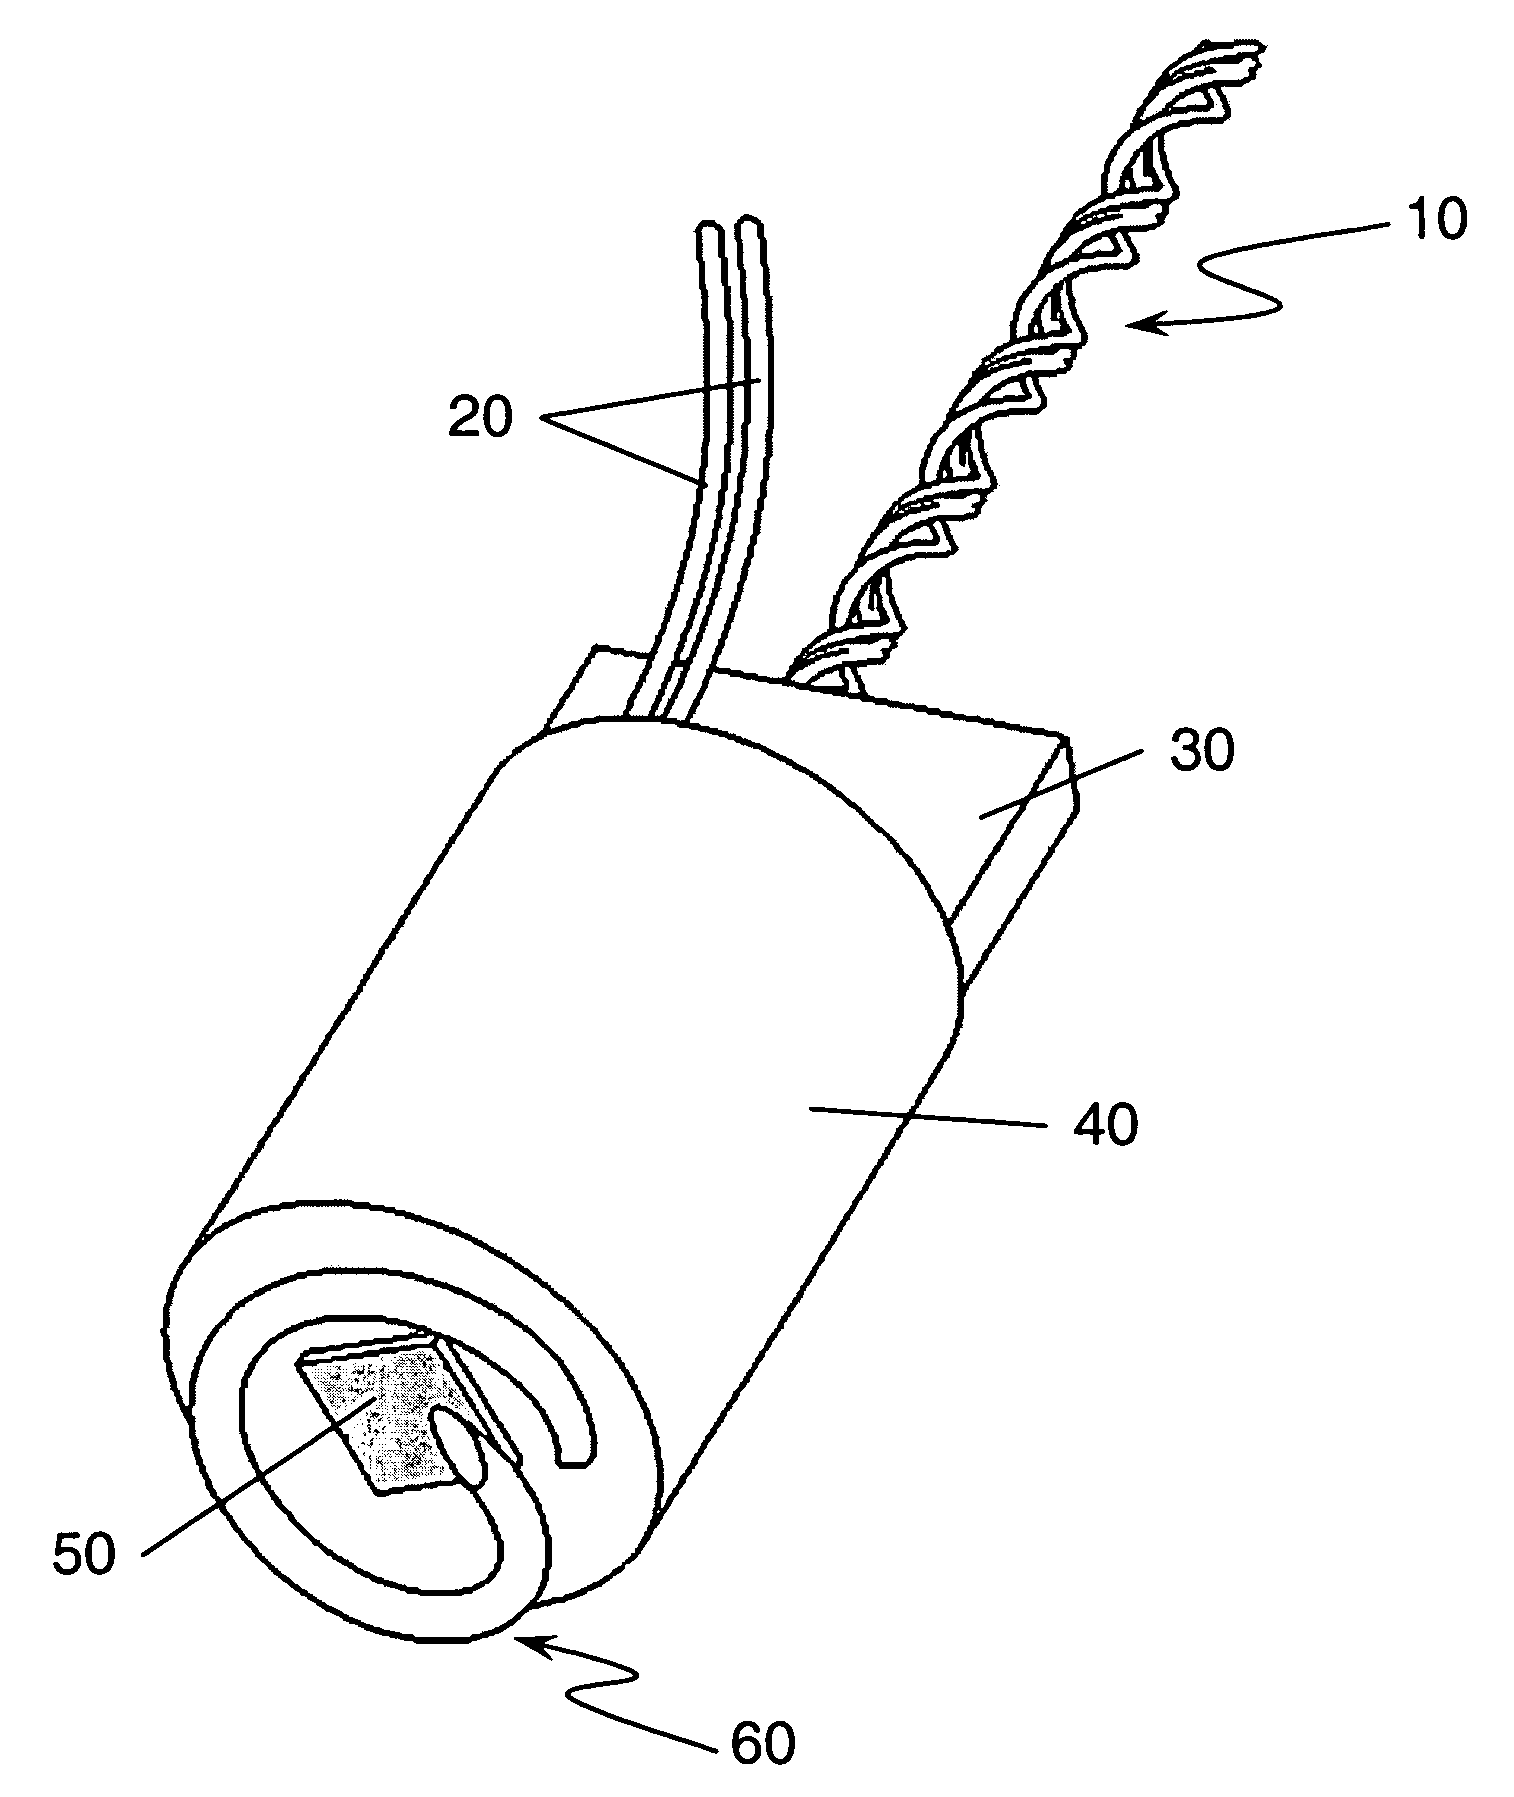 Curved needle assembly for subcutaneous light delivery